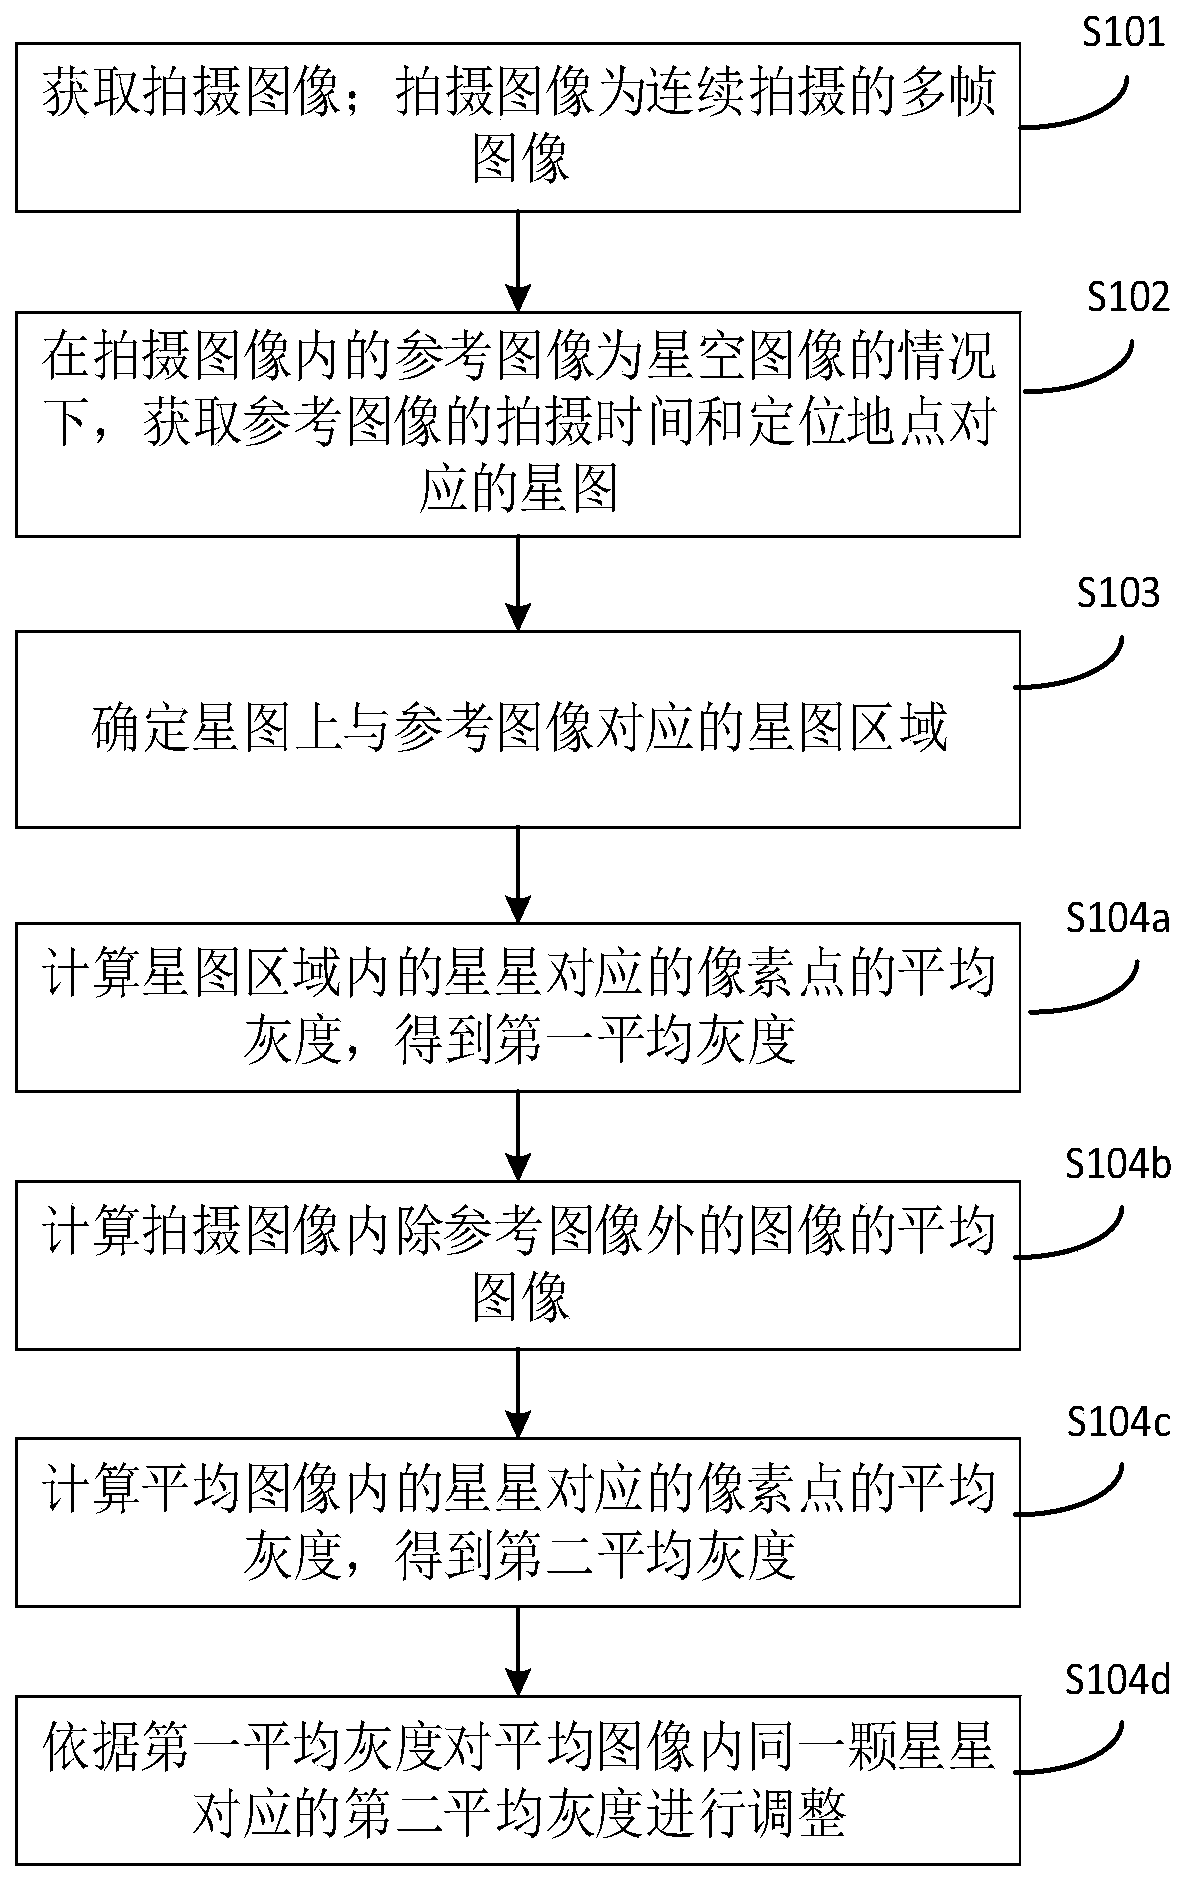 Starry sky image processing method and device